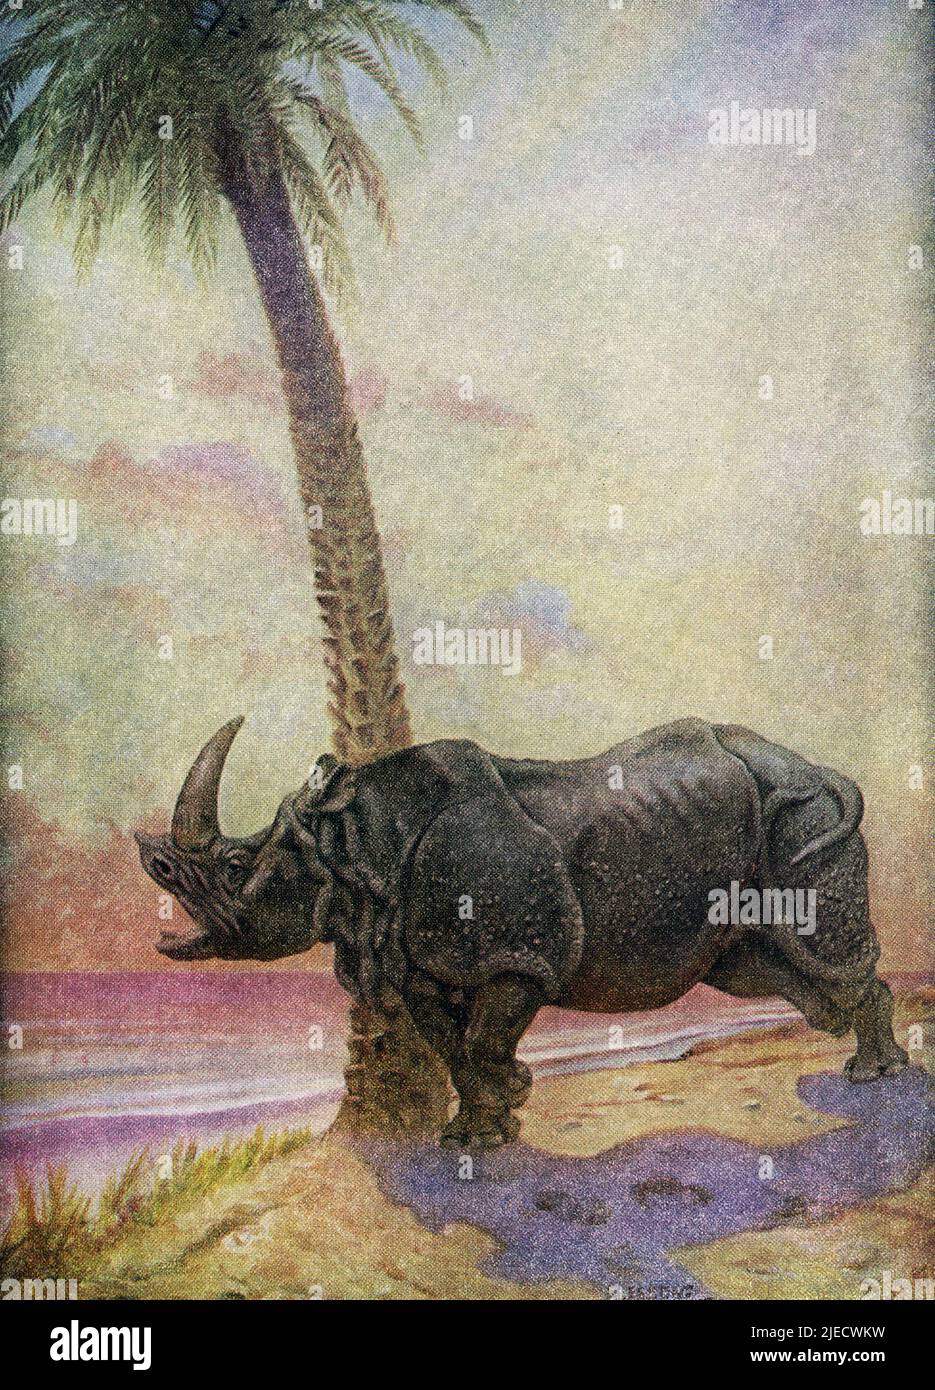 This 1912 image by J M Gleeson illustrates Kipling’s How the Rhinoceros Got Its Skin tale: There was once a Parsee living on an uninhabited island in the Red Sea, with a shiny hat, a knife and a cooking-stove. One day he mixed a fruit cake and put it in the stove to bake. When it was done, a Rhinoceros with a smooth, tightly-fitting skin came along, upset the stove and ate the cake, while the Parsee took refuge up a tree. On a very hot day five weeks later, the Rhinoceros took off his skin, which buttoned underneath, and left it on the beach while he bathed. The Parsee filled it full of stale Stock Photo